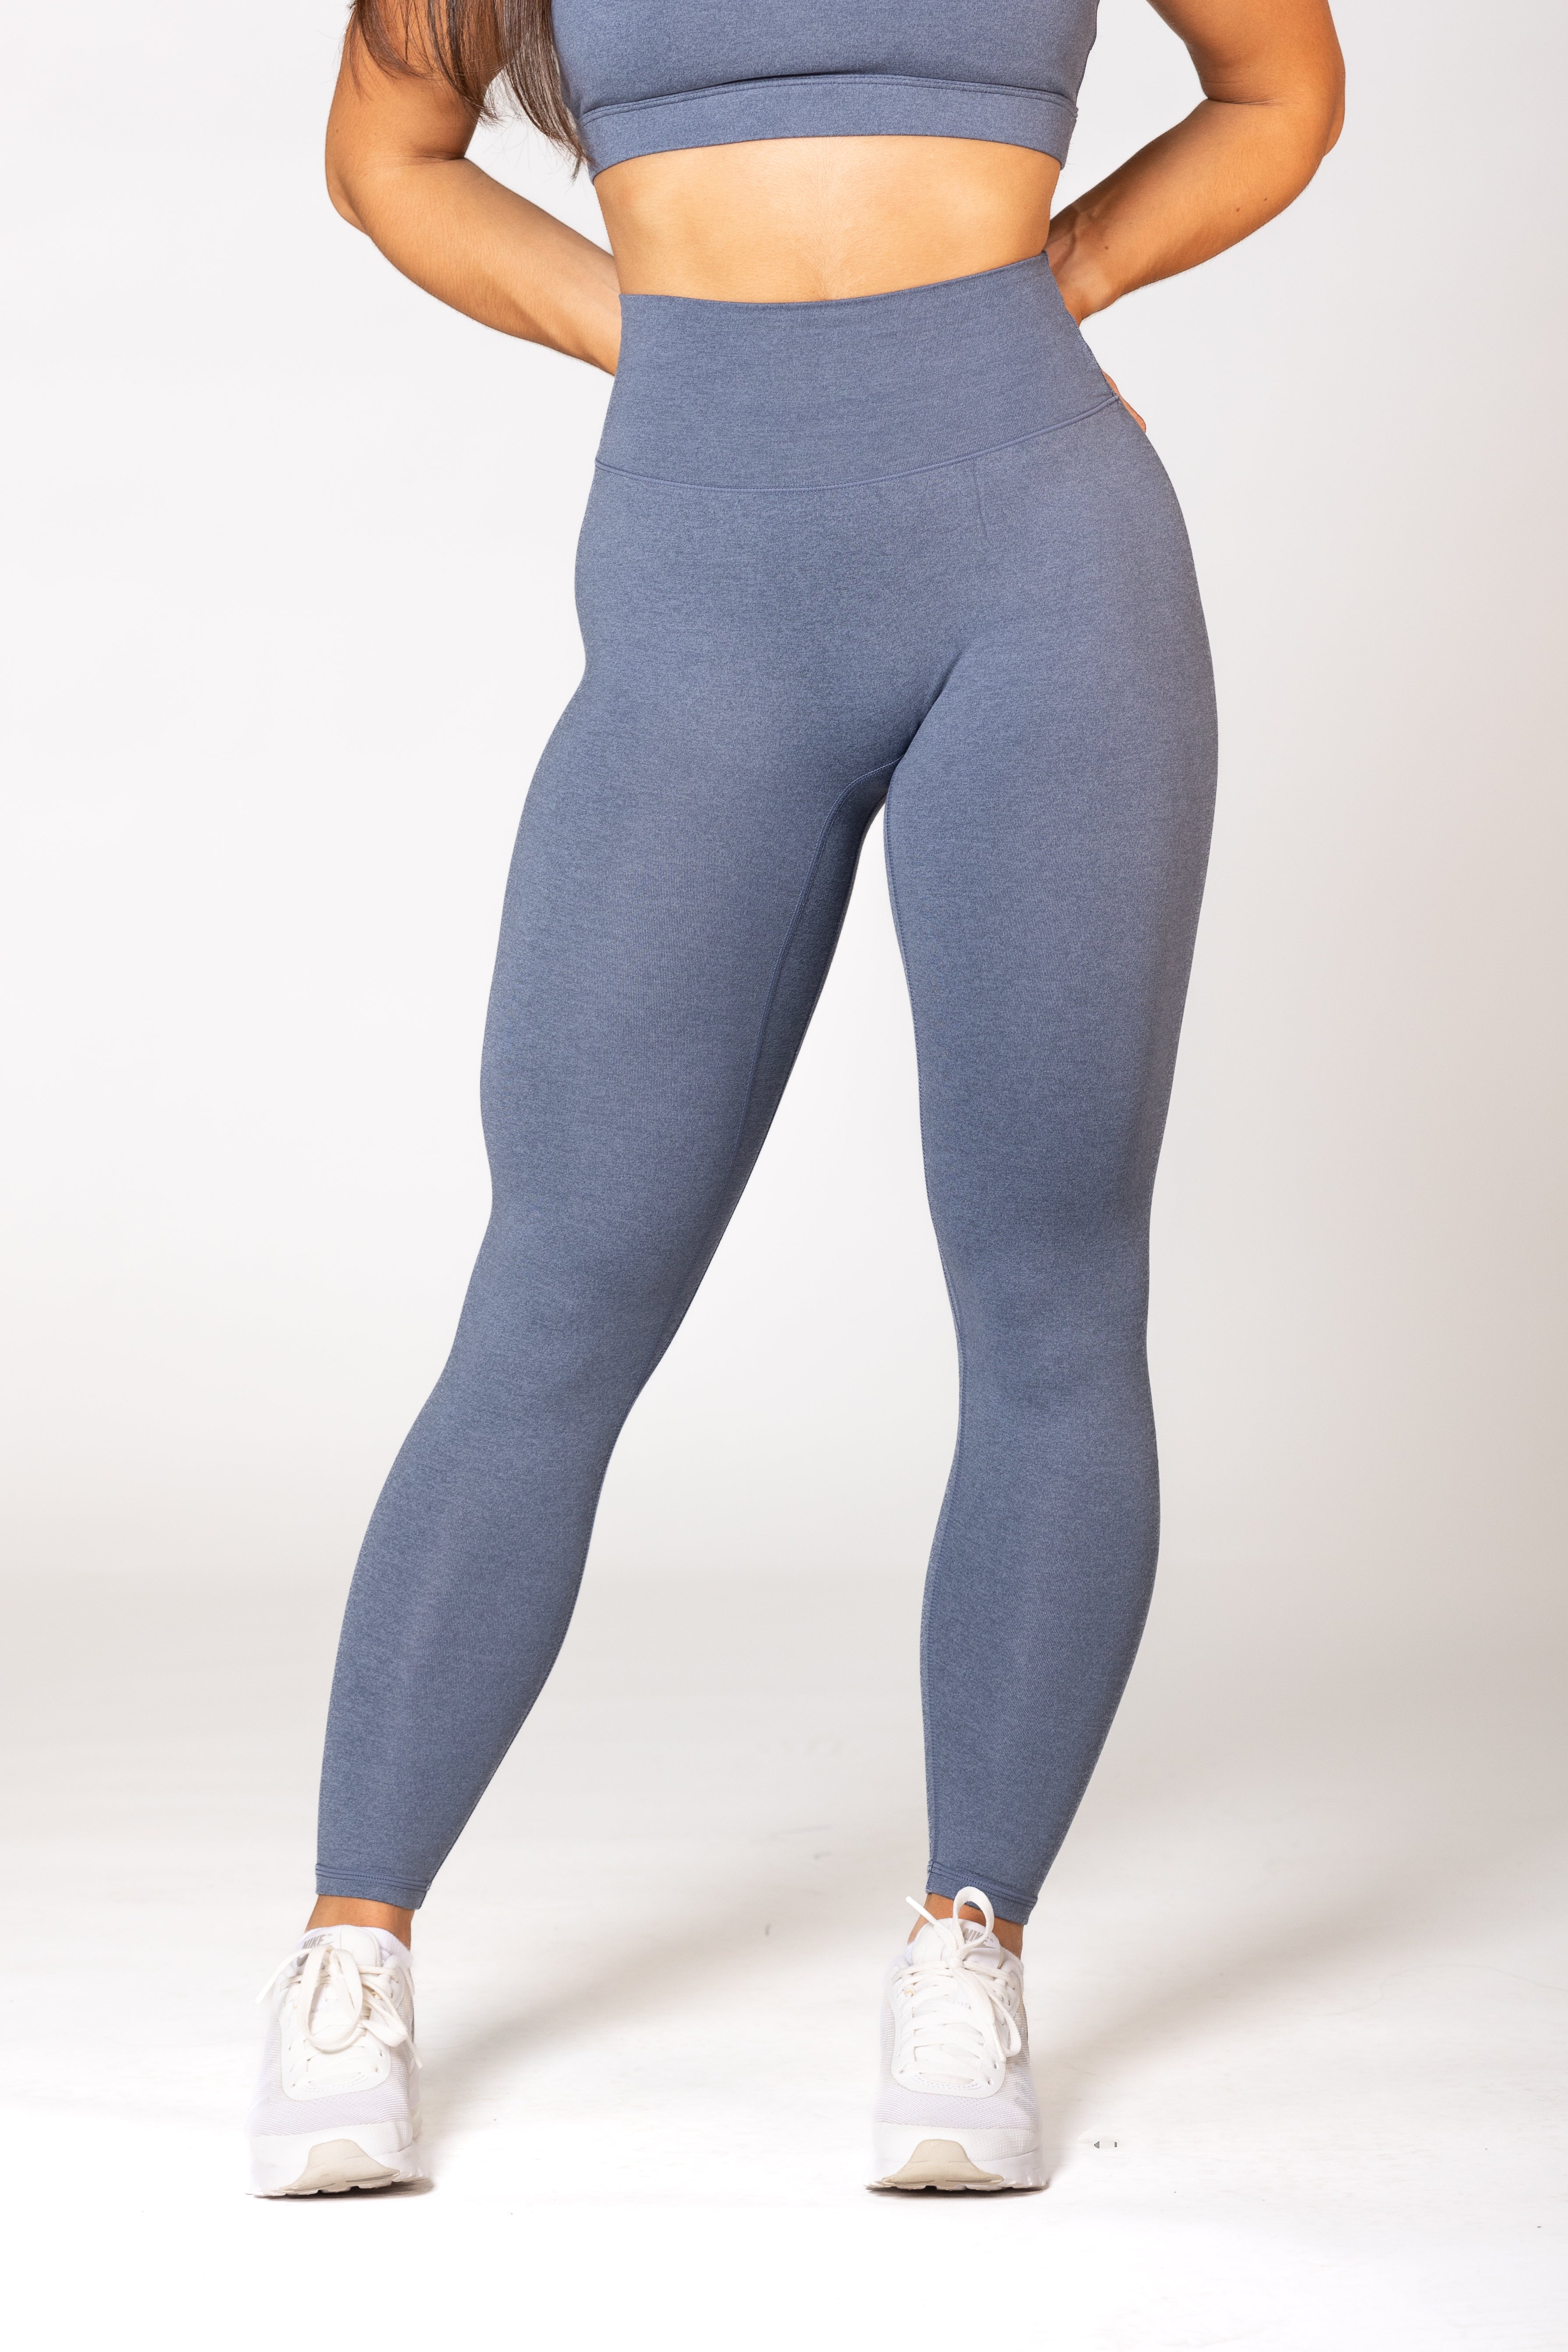 Are Bombshell Leggings Worth It In 2021 | International Society of  Precision Agriculture